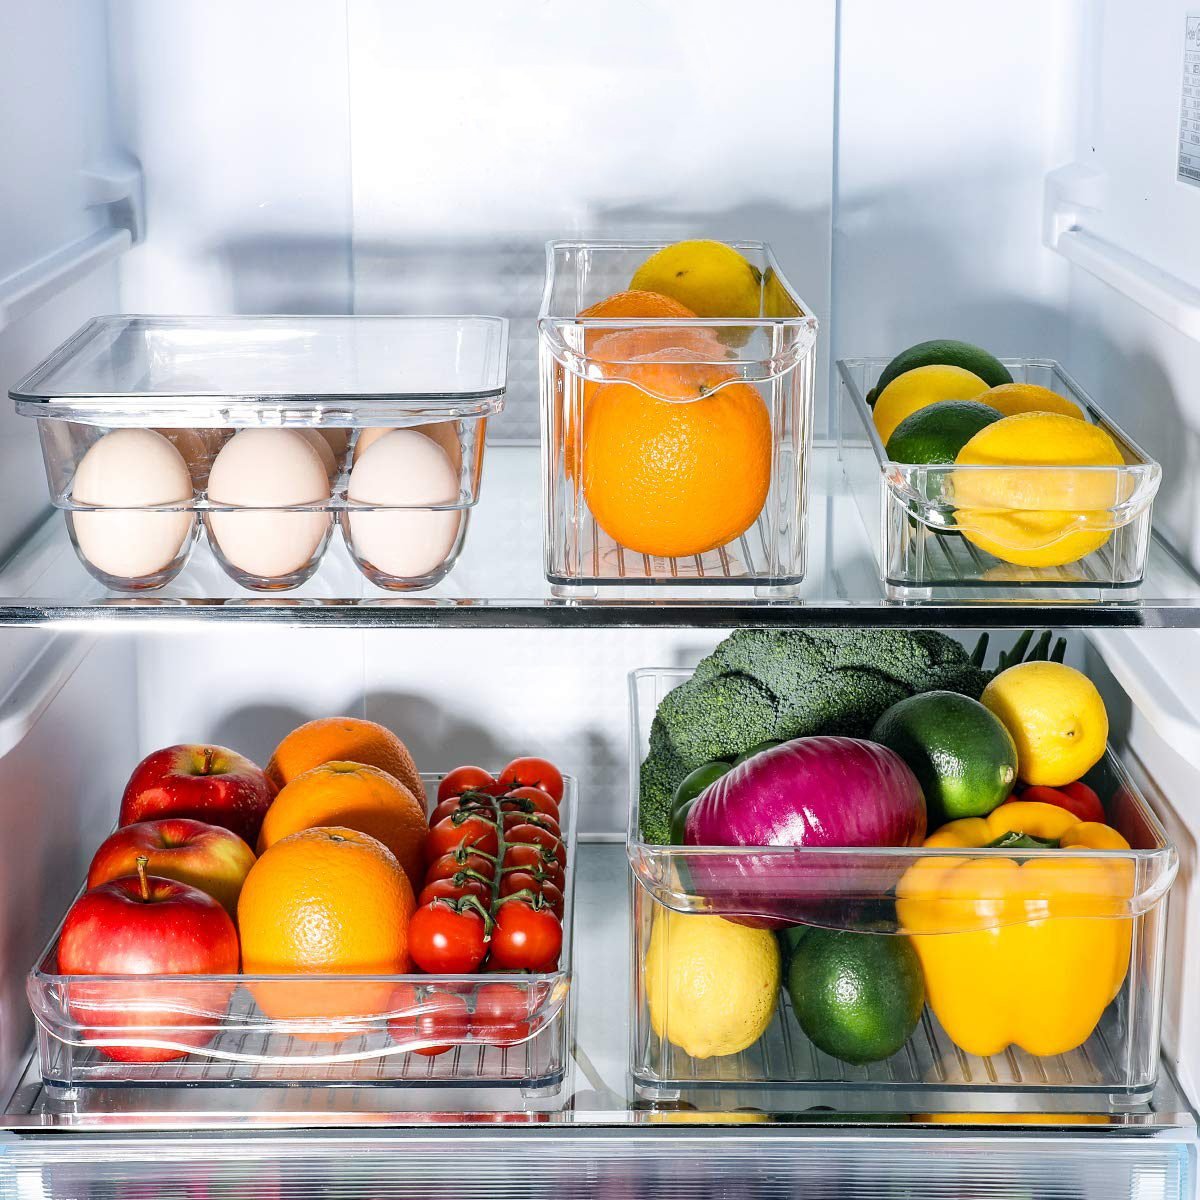 12 Refrigerator Organization Ideas You Have to Try